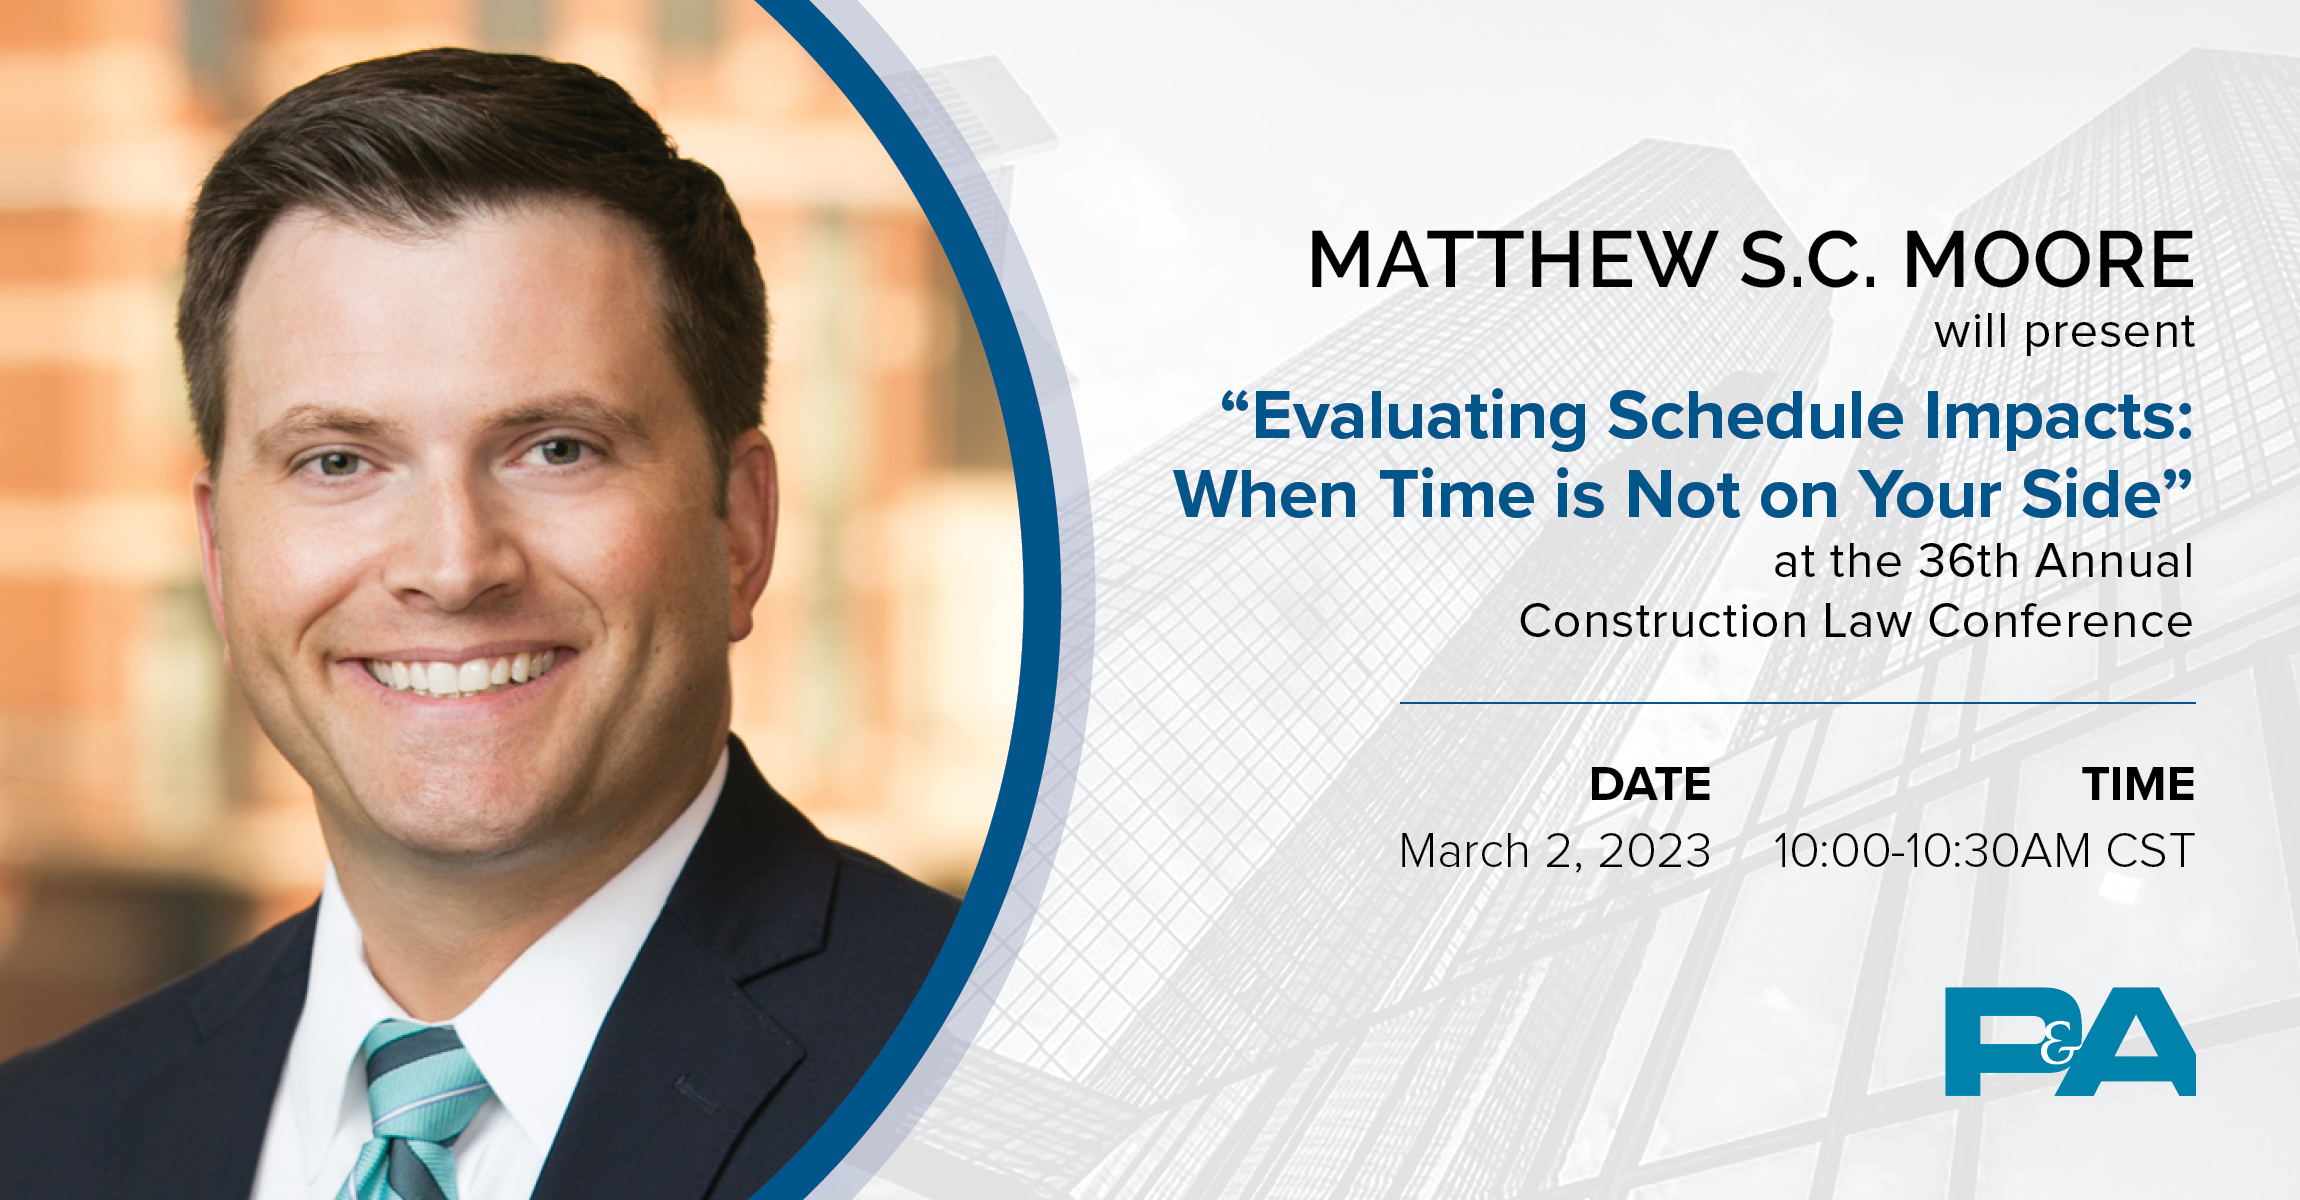 Construction Law Conference Evaluating Schedule Impacts P&A